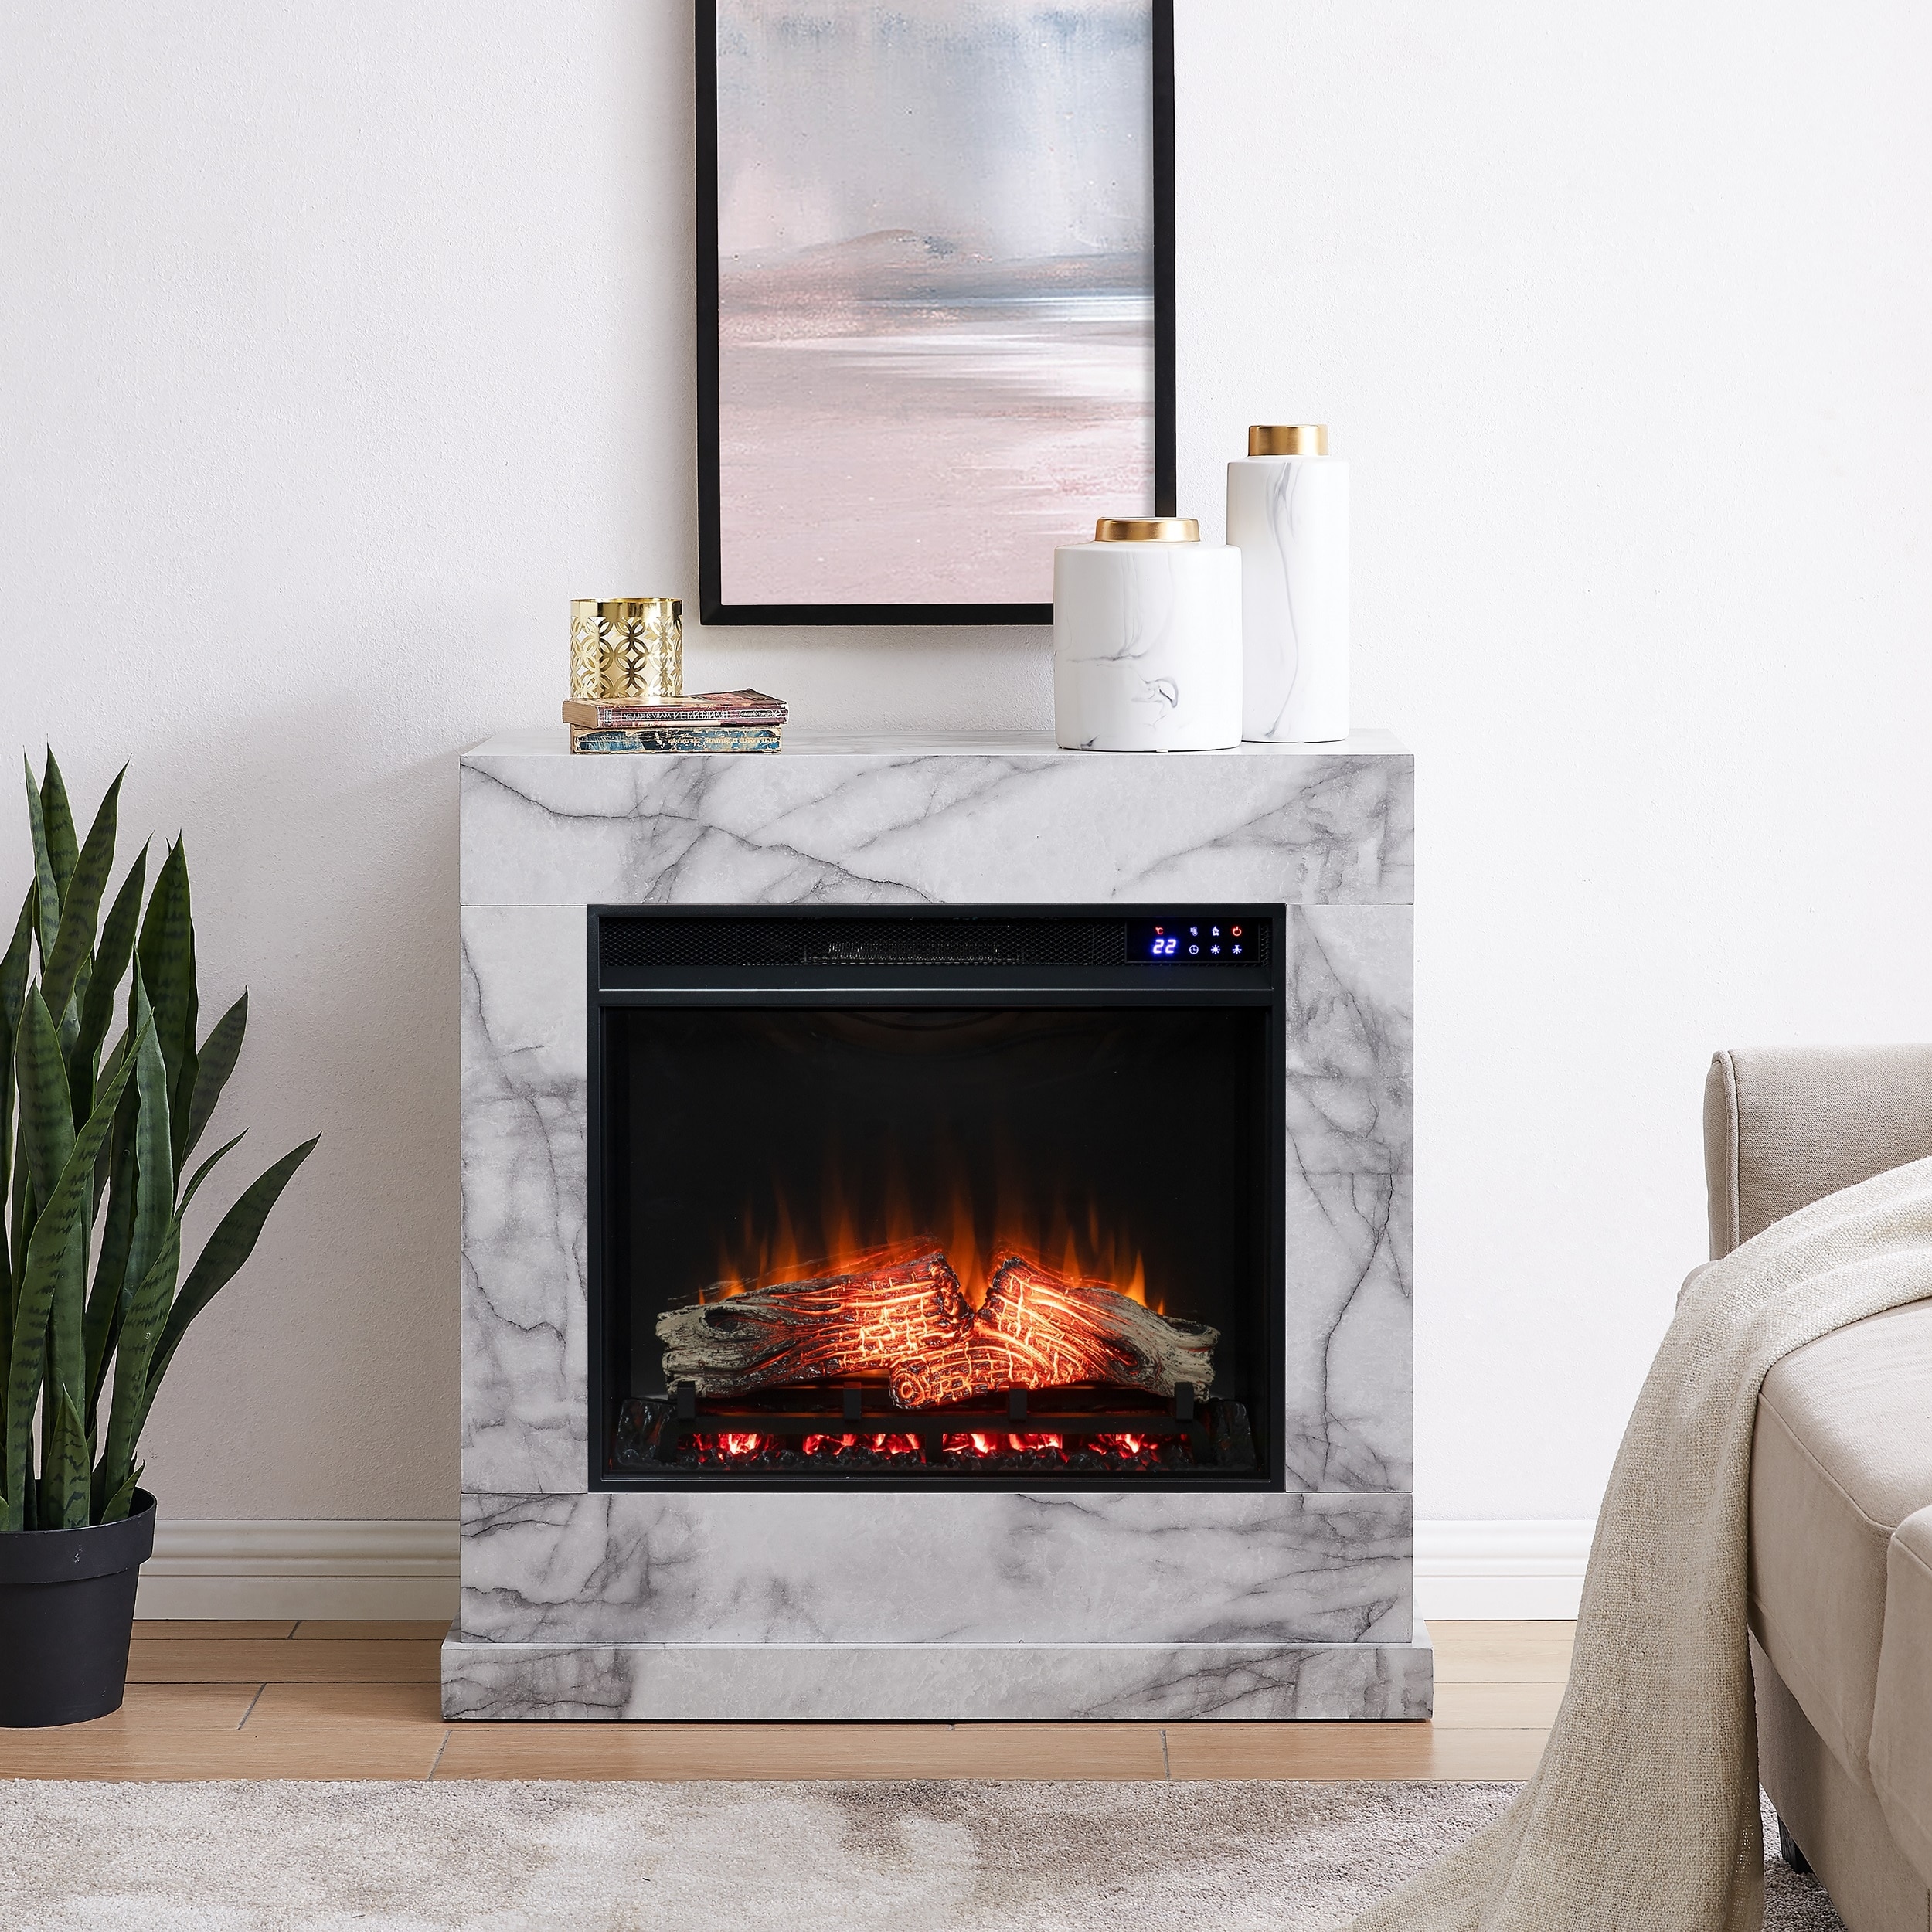 https://ak1.ostkcdn.com/images/products/is/images/direct/04b64e228ac2d5150521db6dbb612afce737f575/Harper-Blvd-Dejon-Contemporary-White-Stone-Electric-Fireplace.jpg